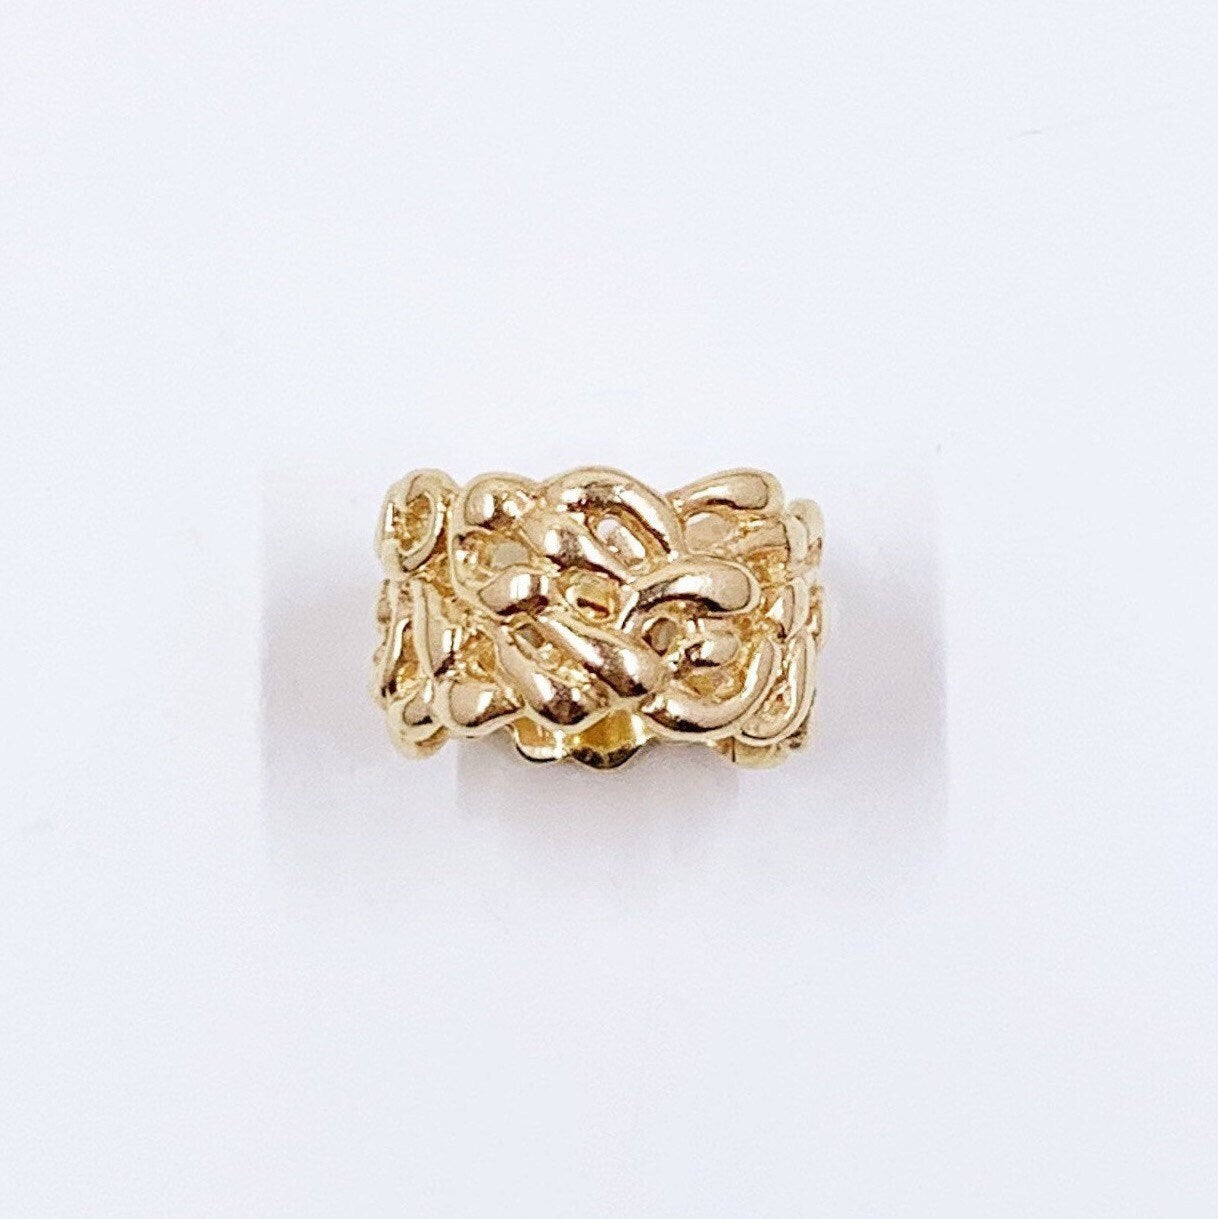 Vintage 14k Gold Decorative Wide Band | Textured Pierced Scroll Band Ring | 5 1/2 Ring